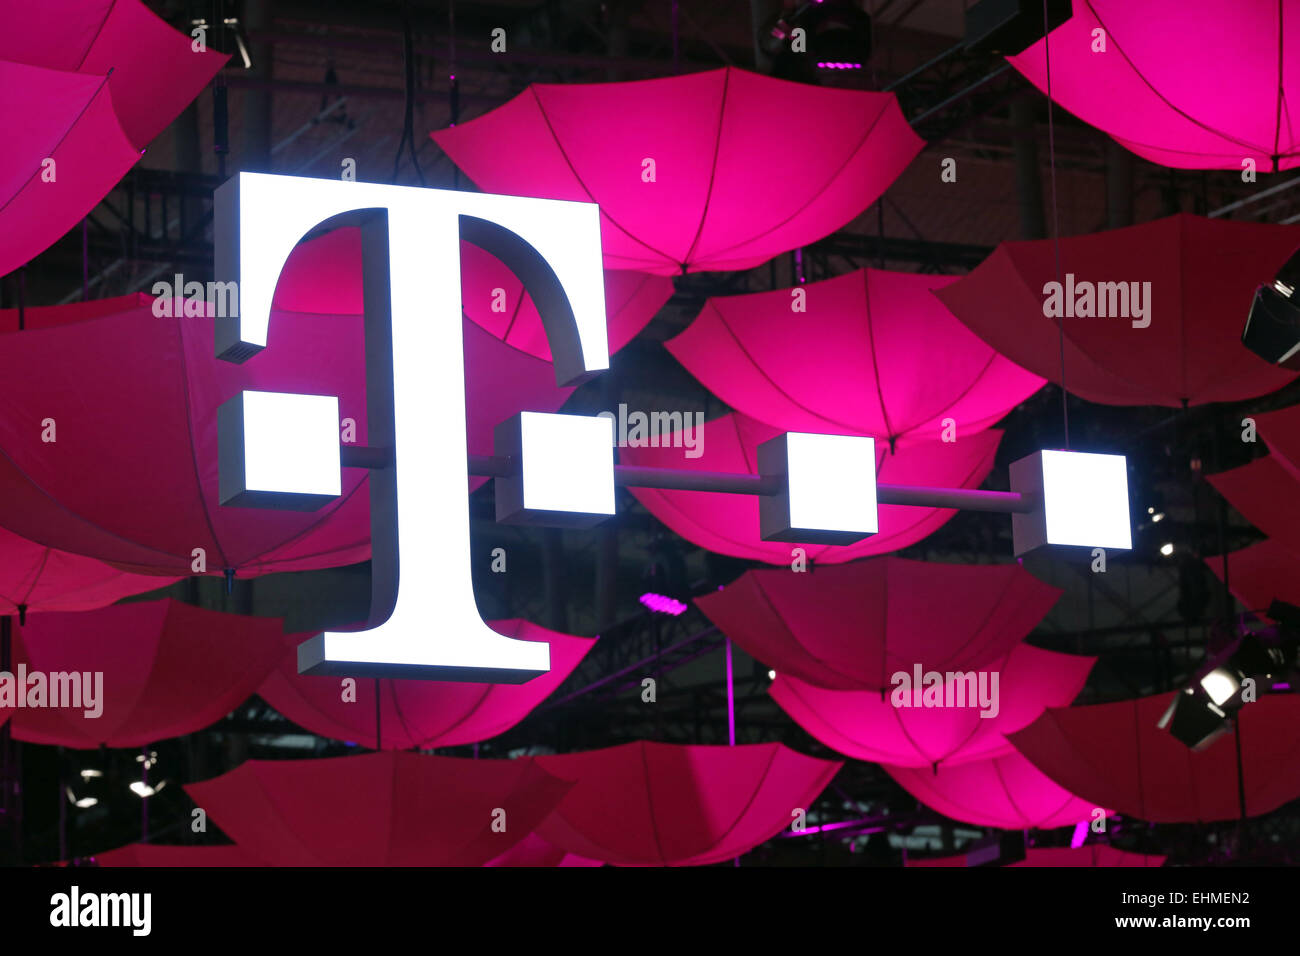 CeBIT computer fair 2015 in Hannover, Germany. Logo of German Telekom at their stand with hundreds of pink umbrellas forming a roof Stock Photo